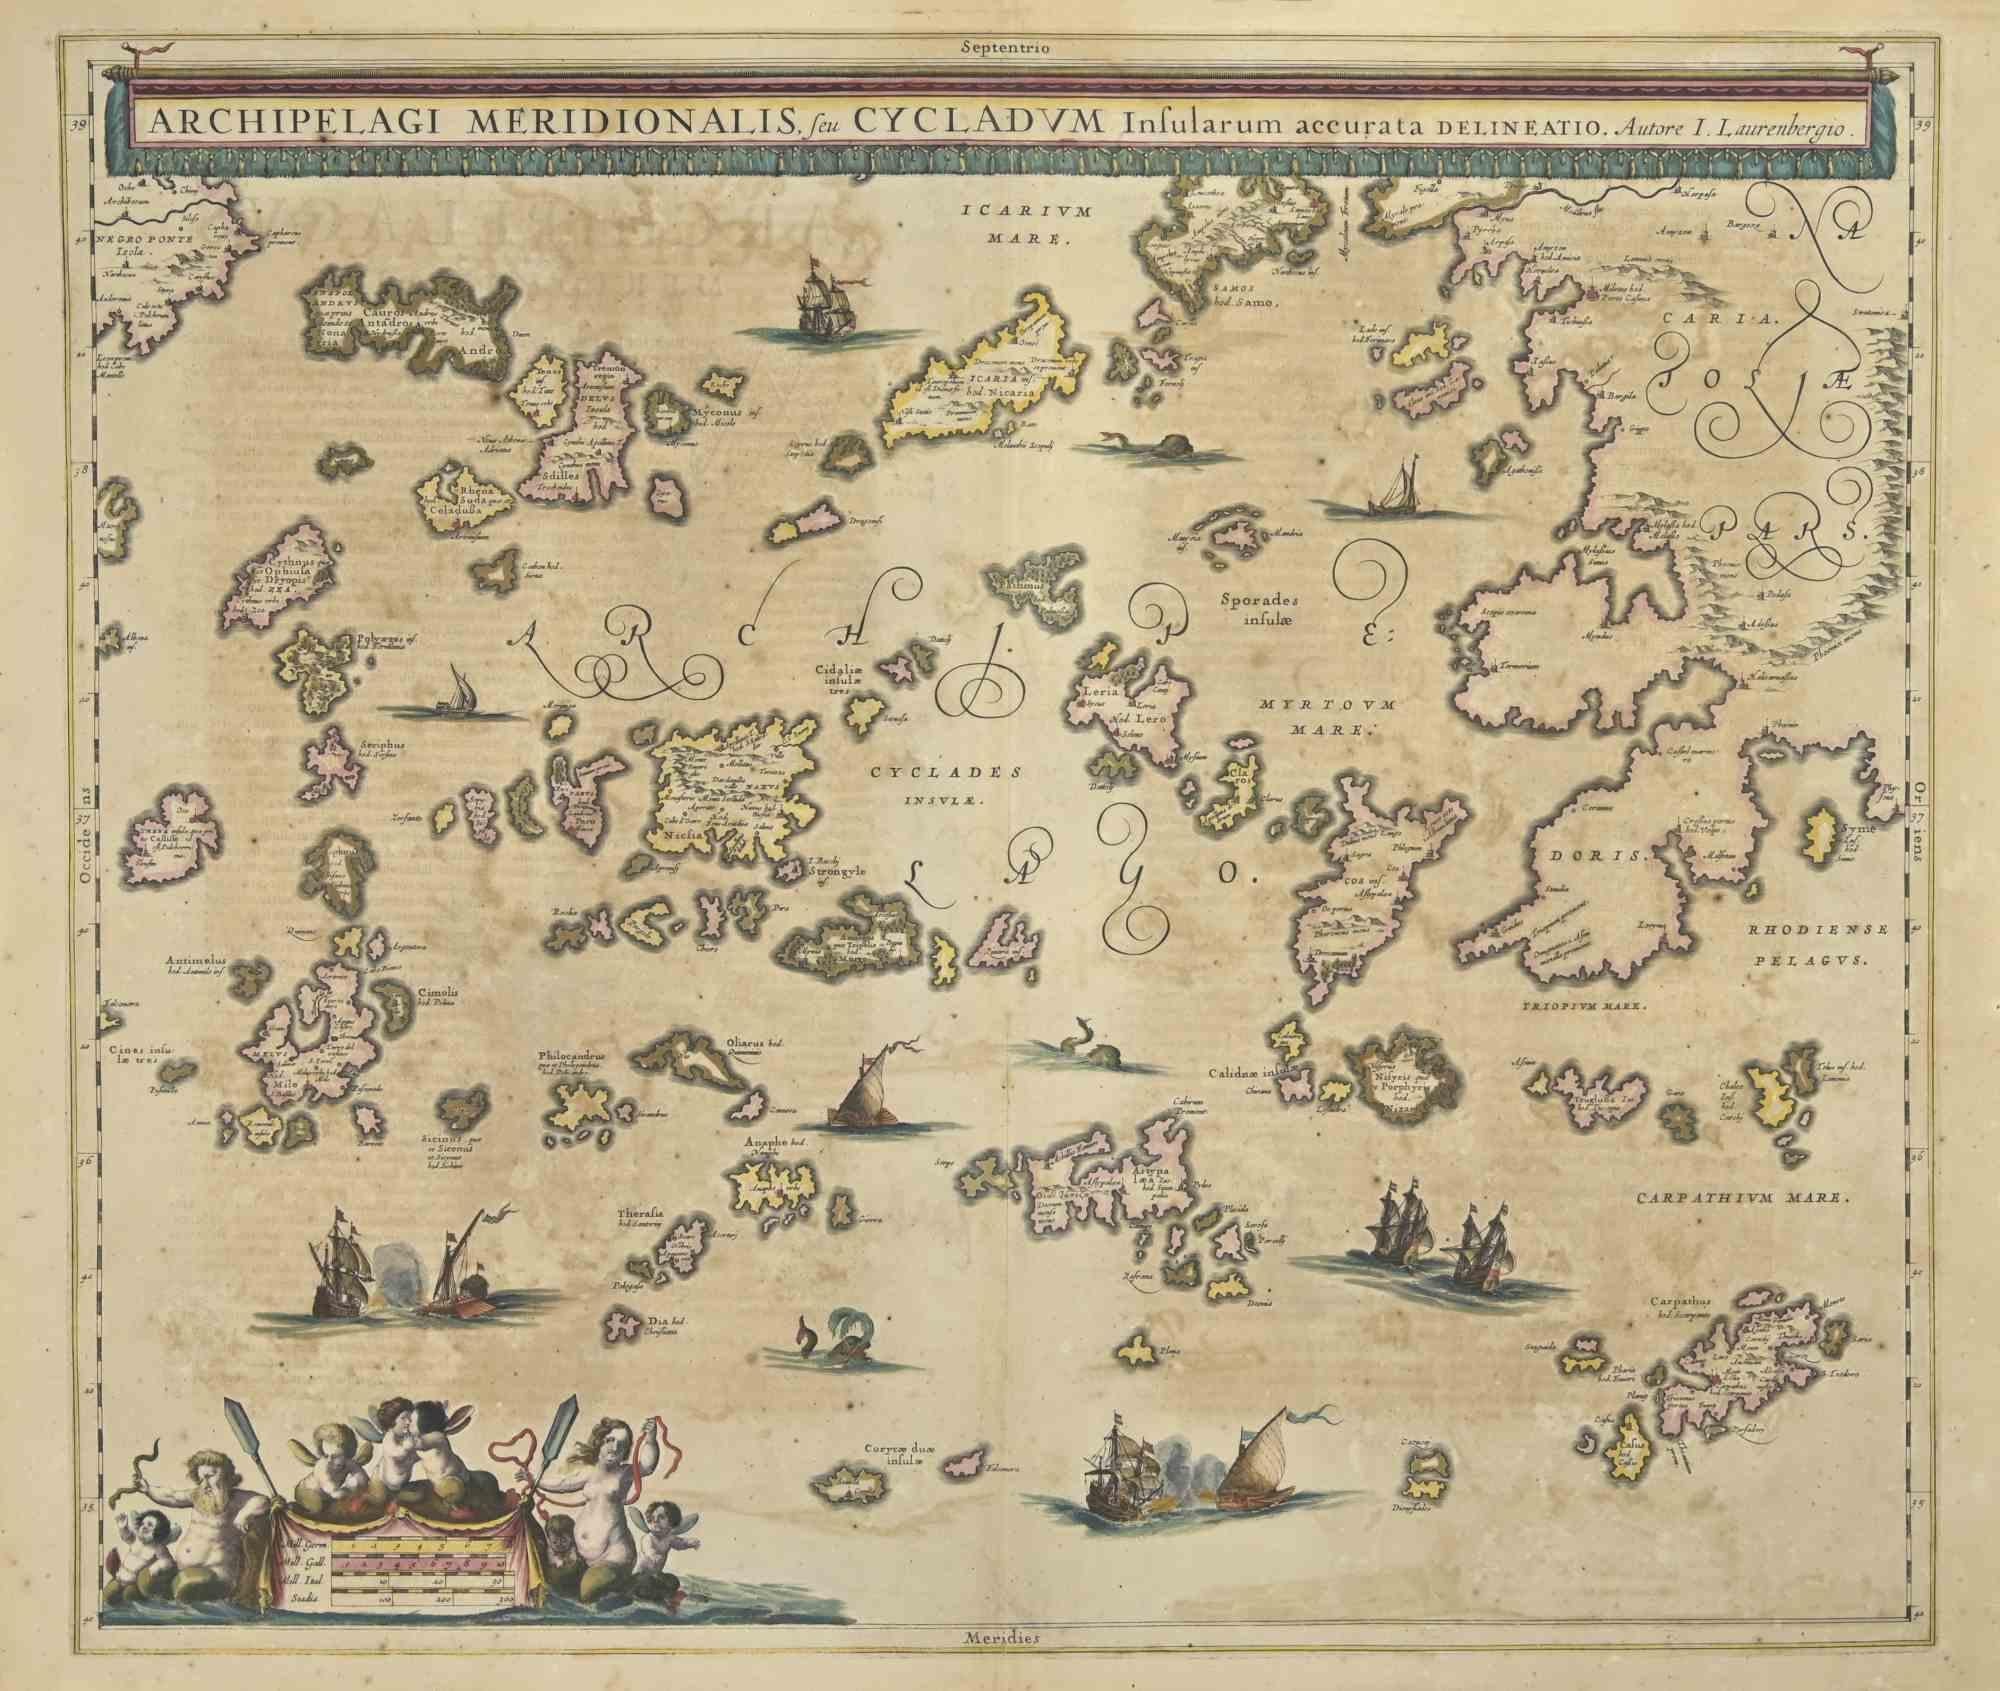 Antique Map - Archipela Meridionalis is an antique map realized in 1650 by Johannes Janssonius (1588-1664).

The Map is Hand-colored etching, with coeval watercolorang.

Good conditions with slight foxing.

From Atlantis majoris quinta pars, Orbem